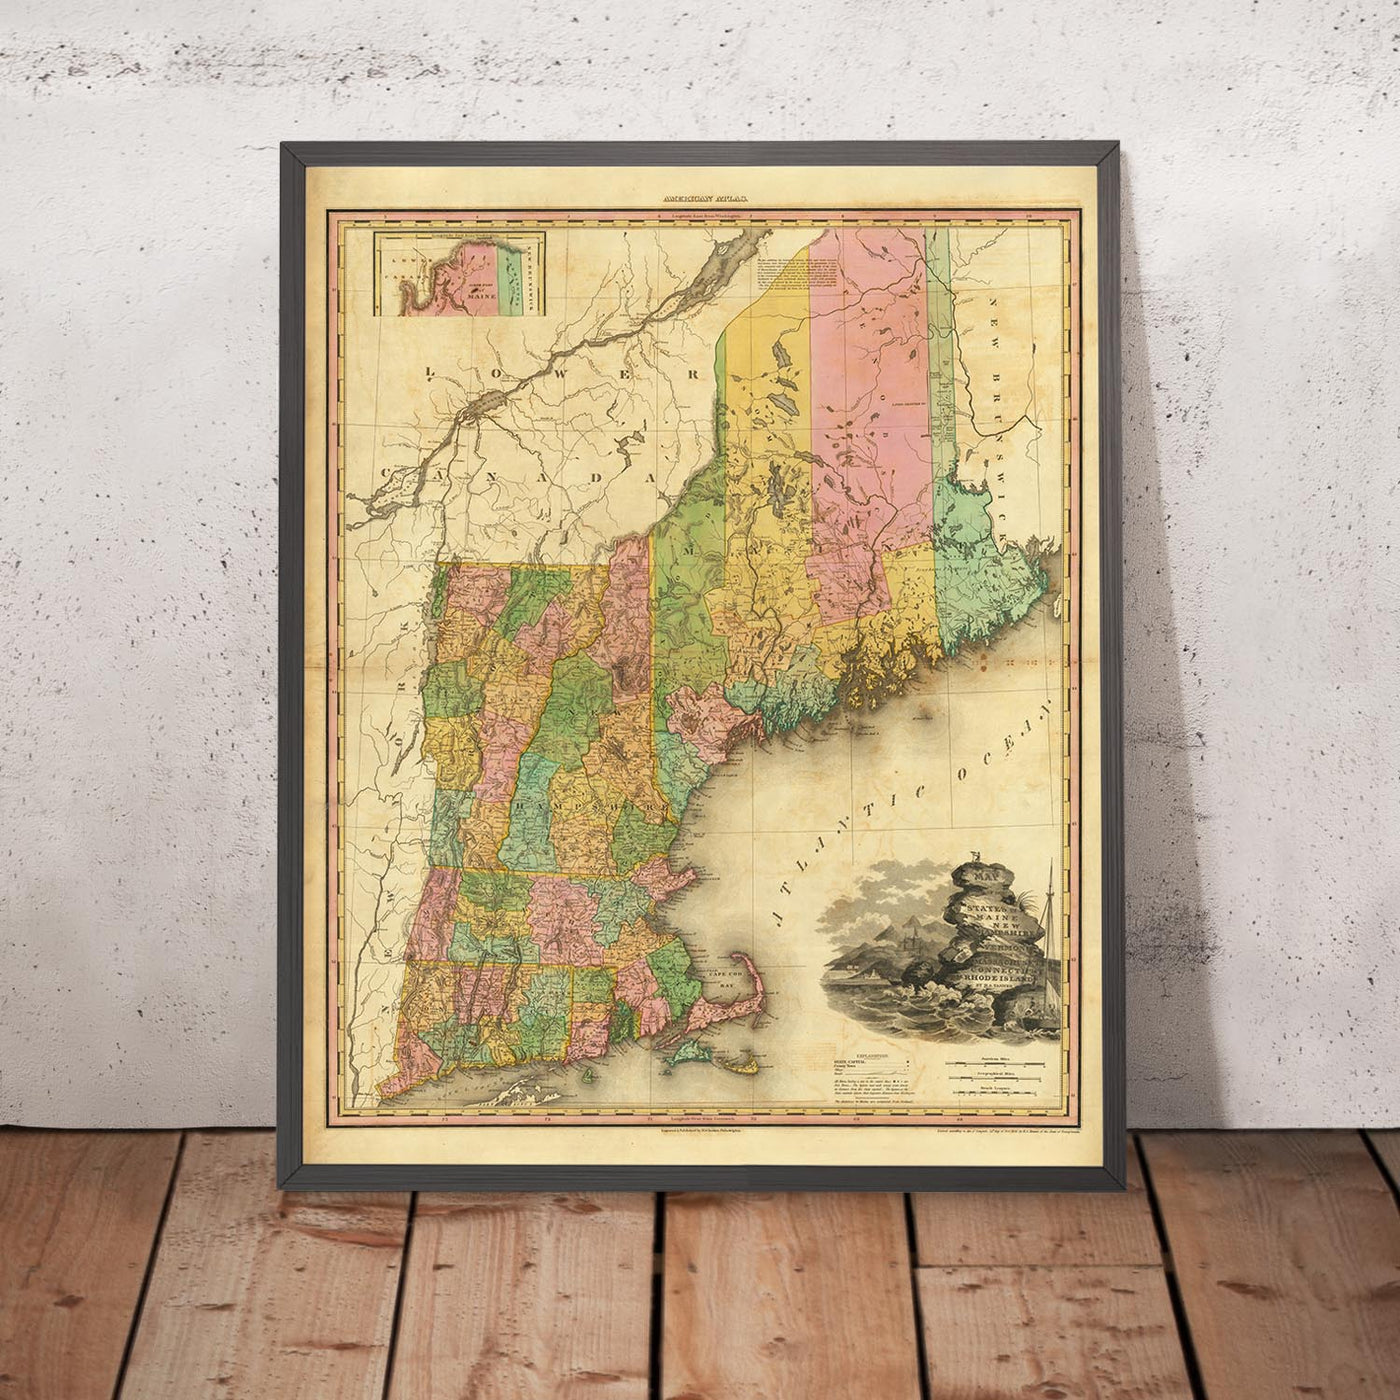 Old Map of New England by H. S. Tanner, 1820 - Boston, Providence, Hartford, Portland, Worcester